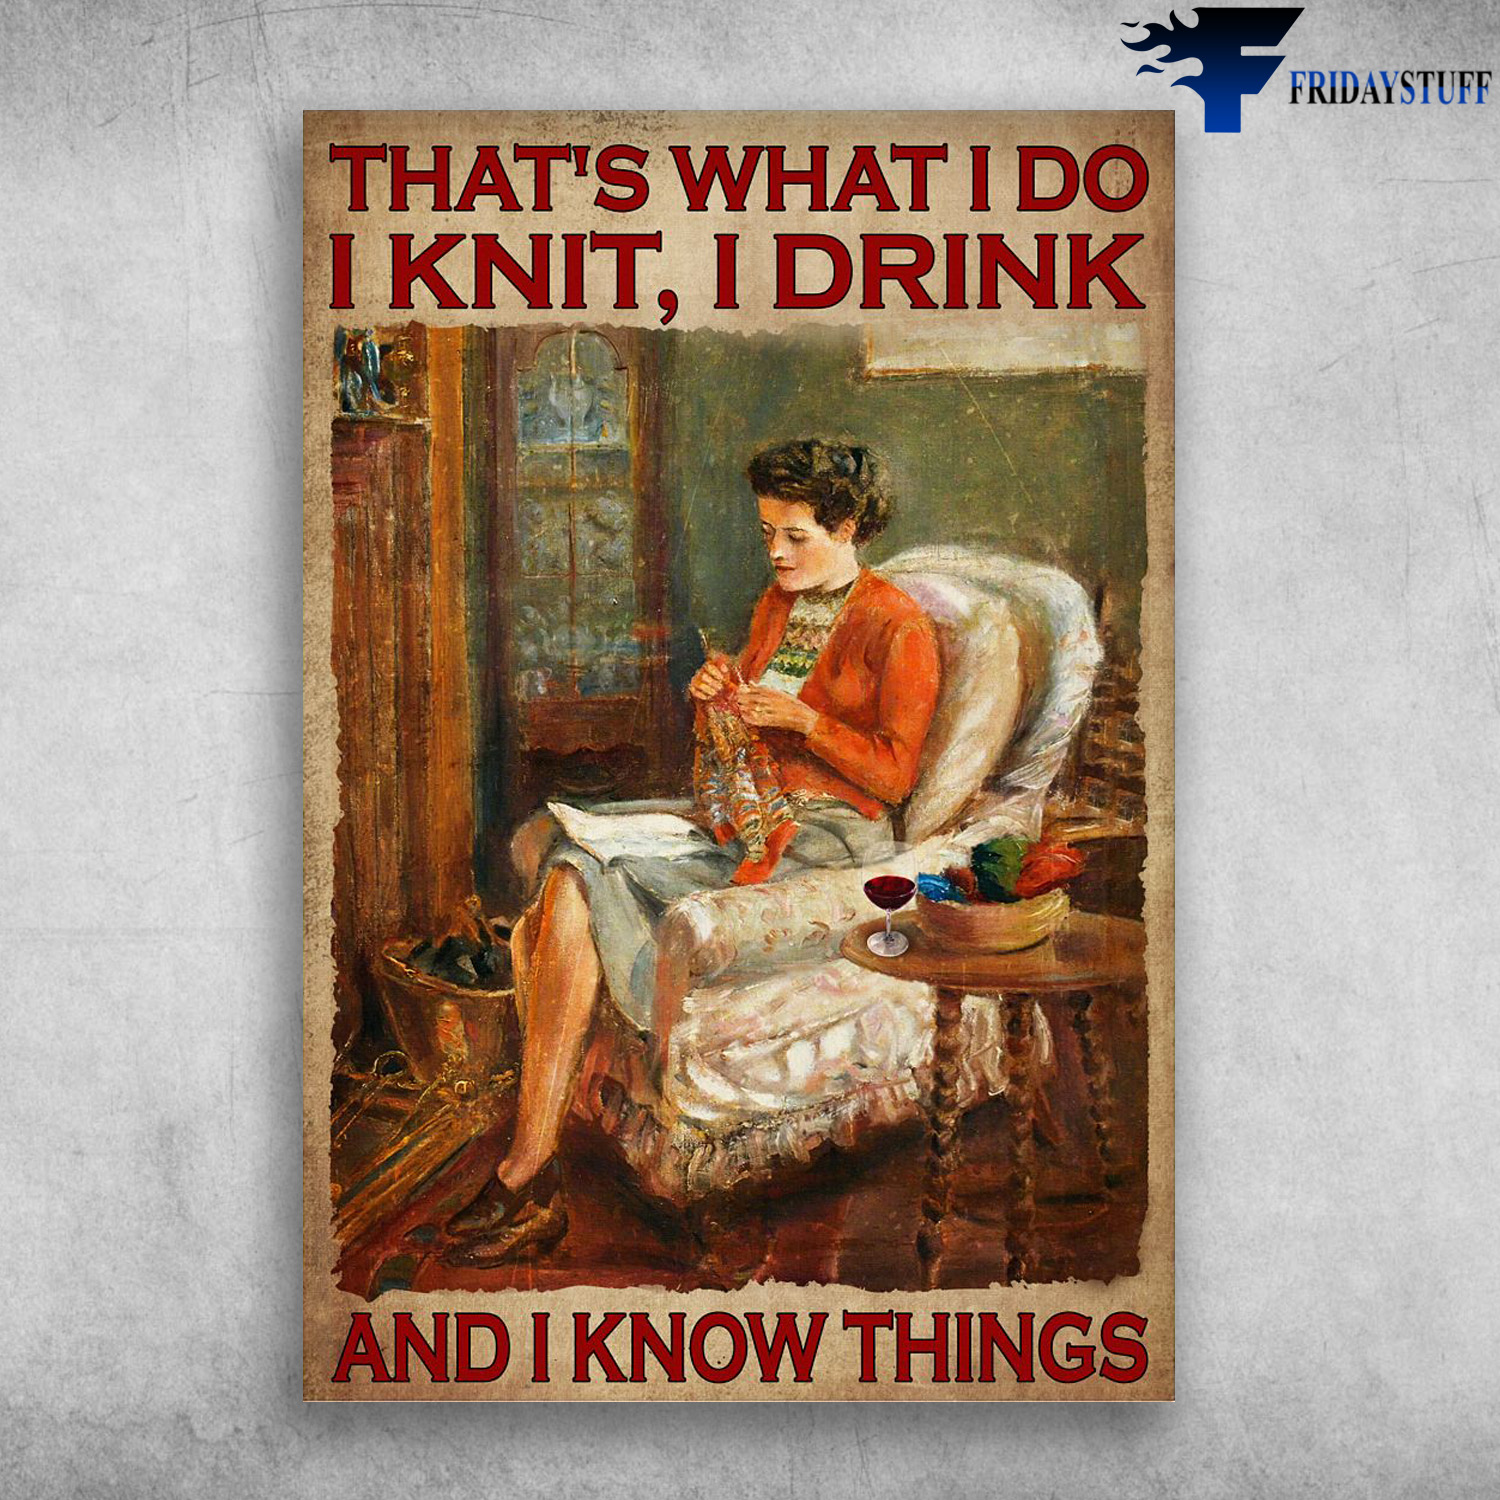 Lady Knits And Drinks Wine - That's What I Do, I Knit, I Drink, And I Know Things